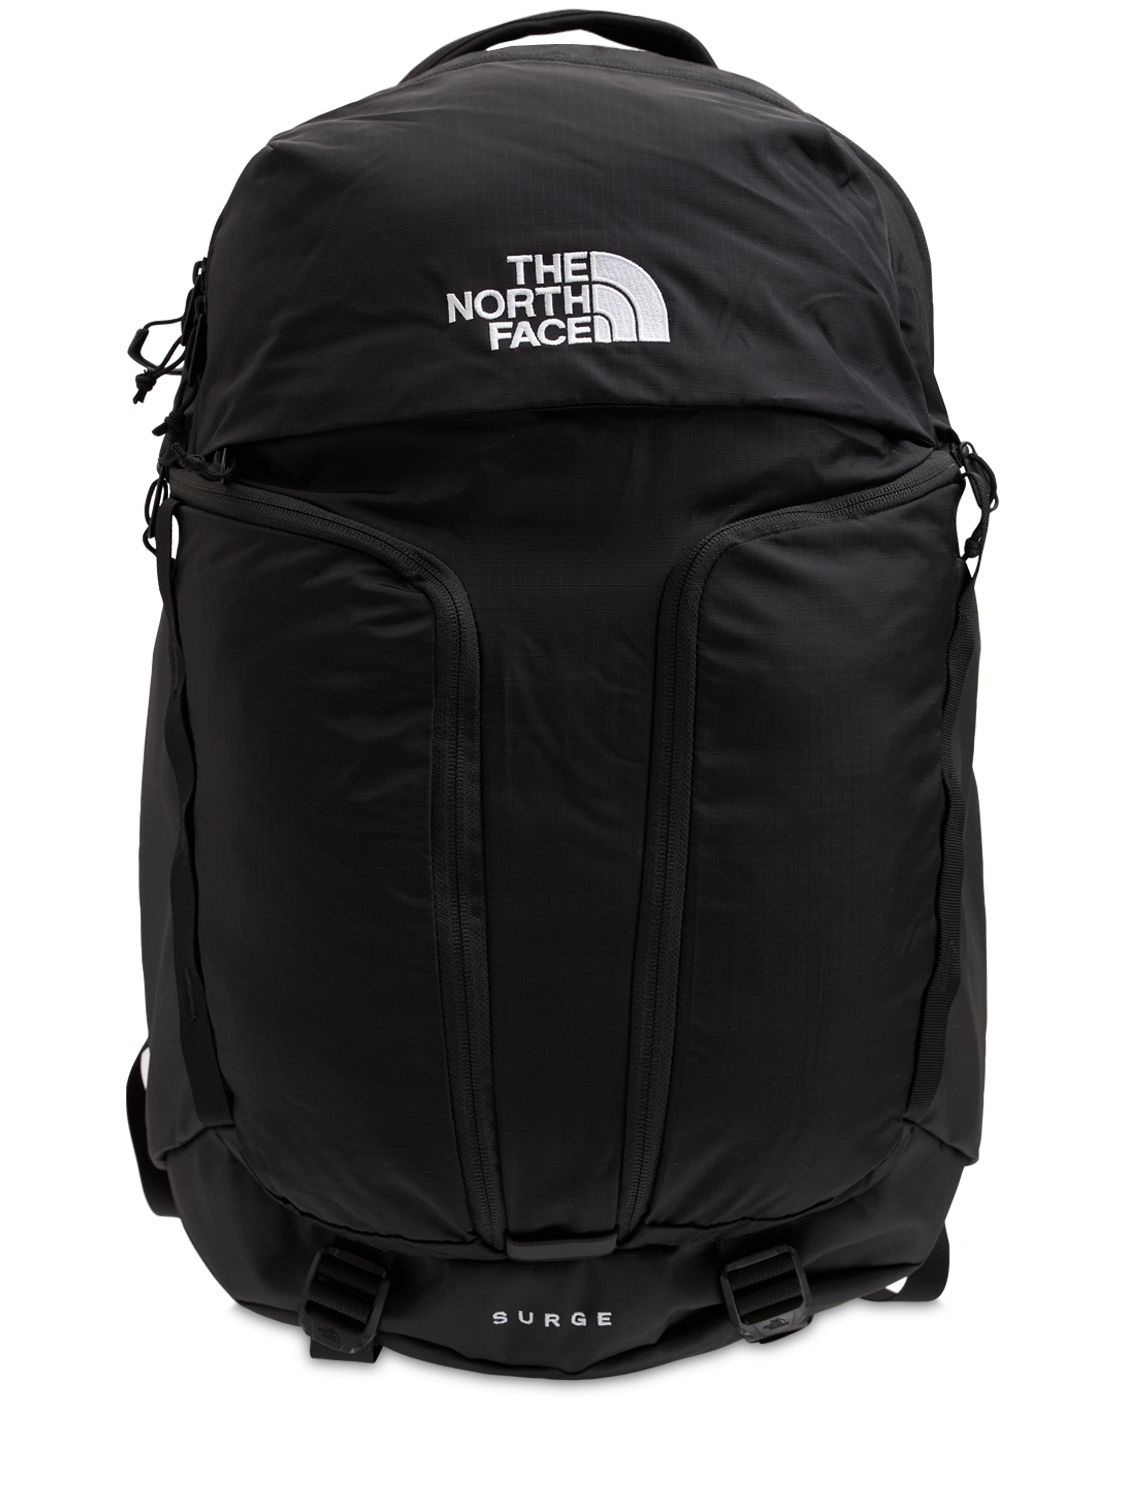 THE NORTH FACE SURGE NYLON BACKPACK